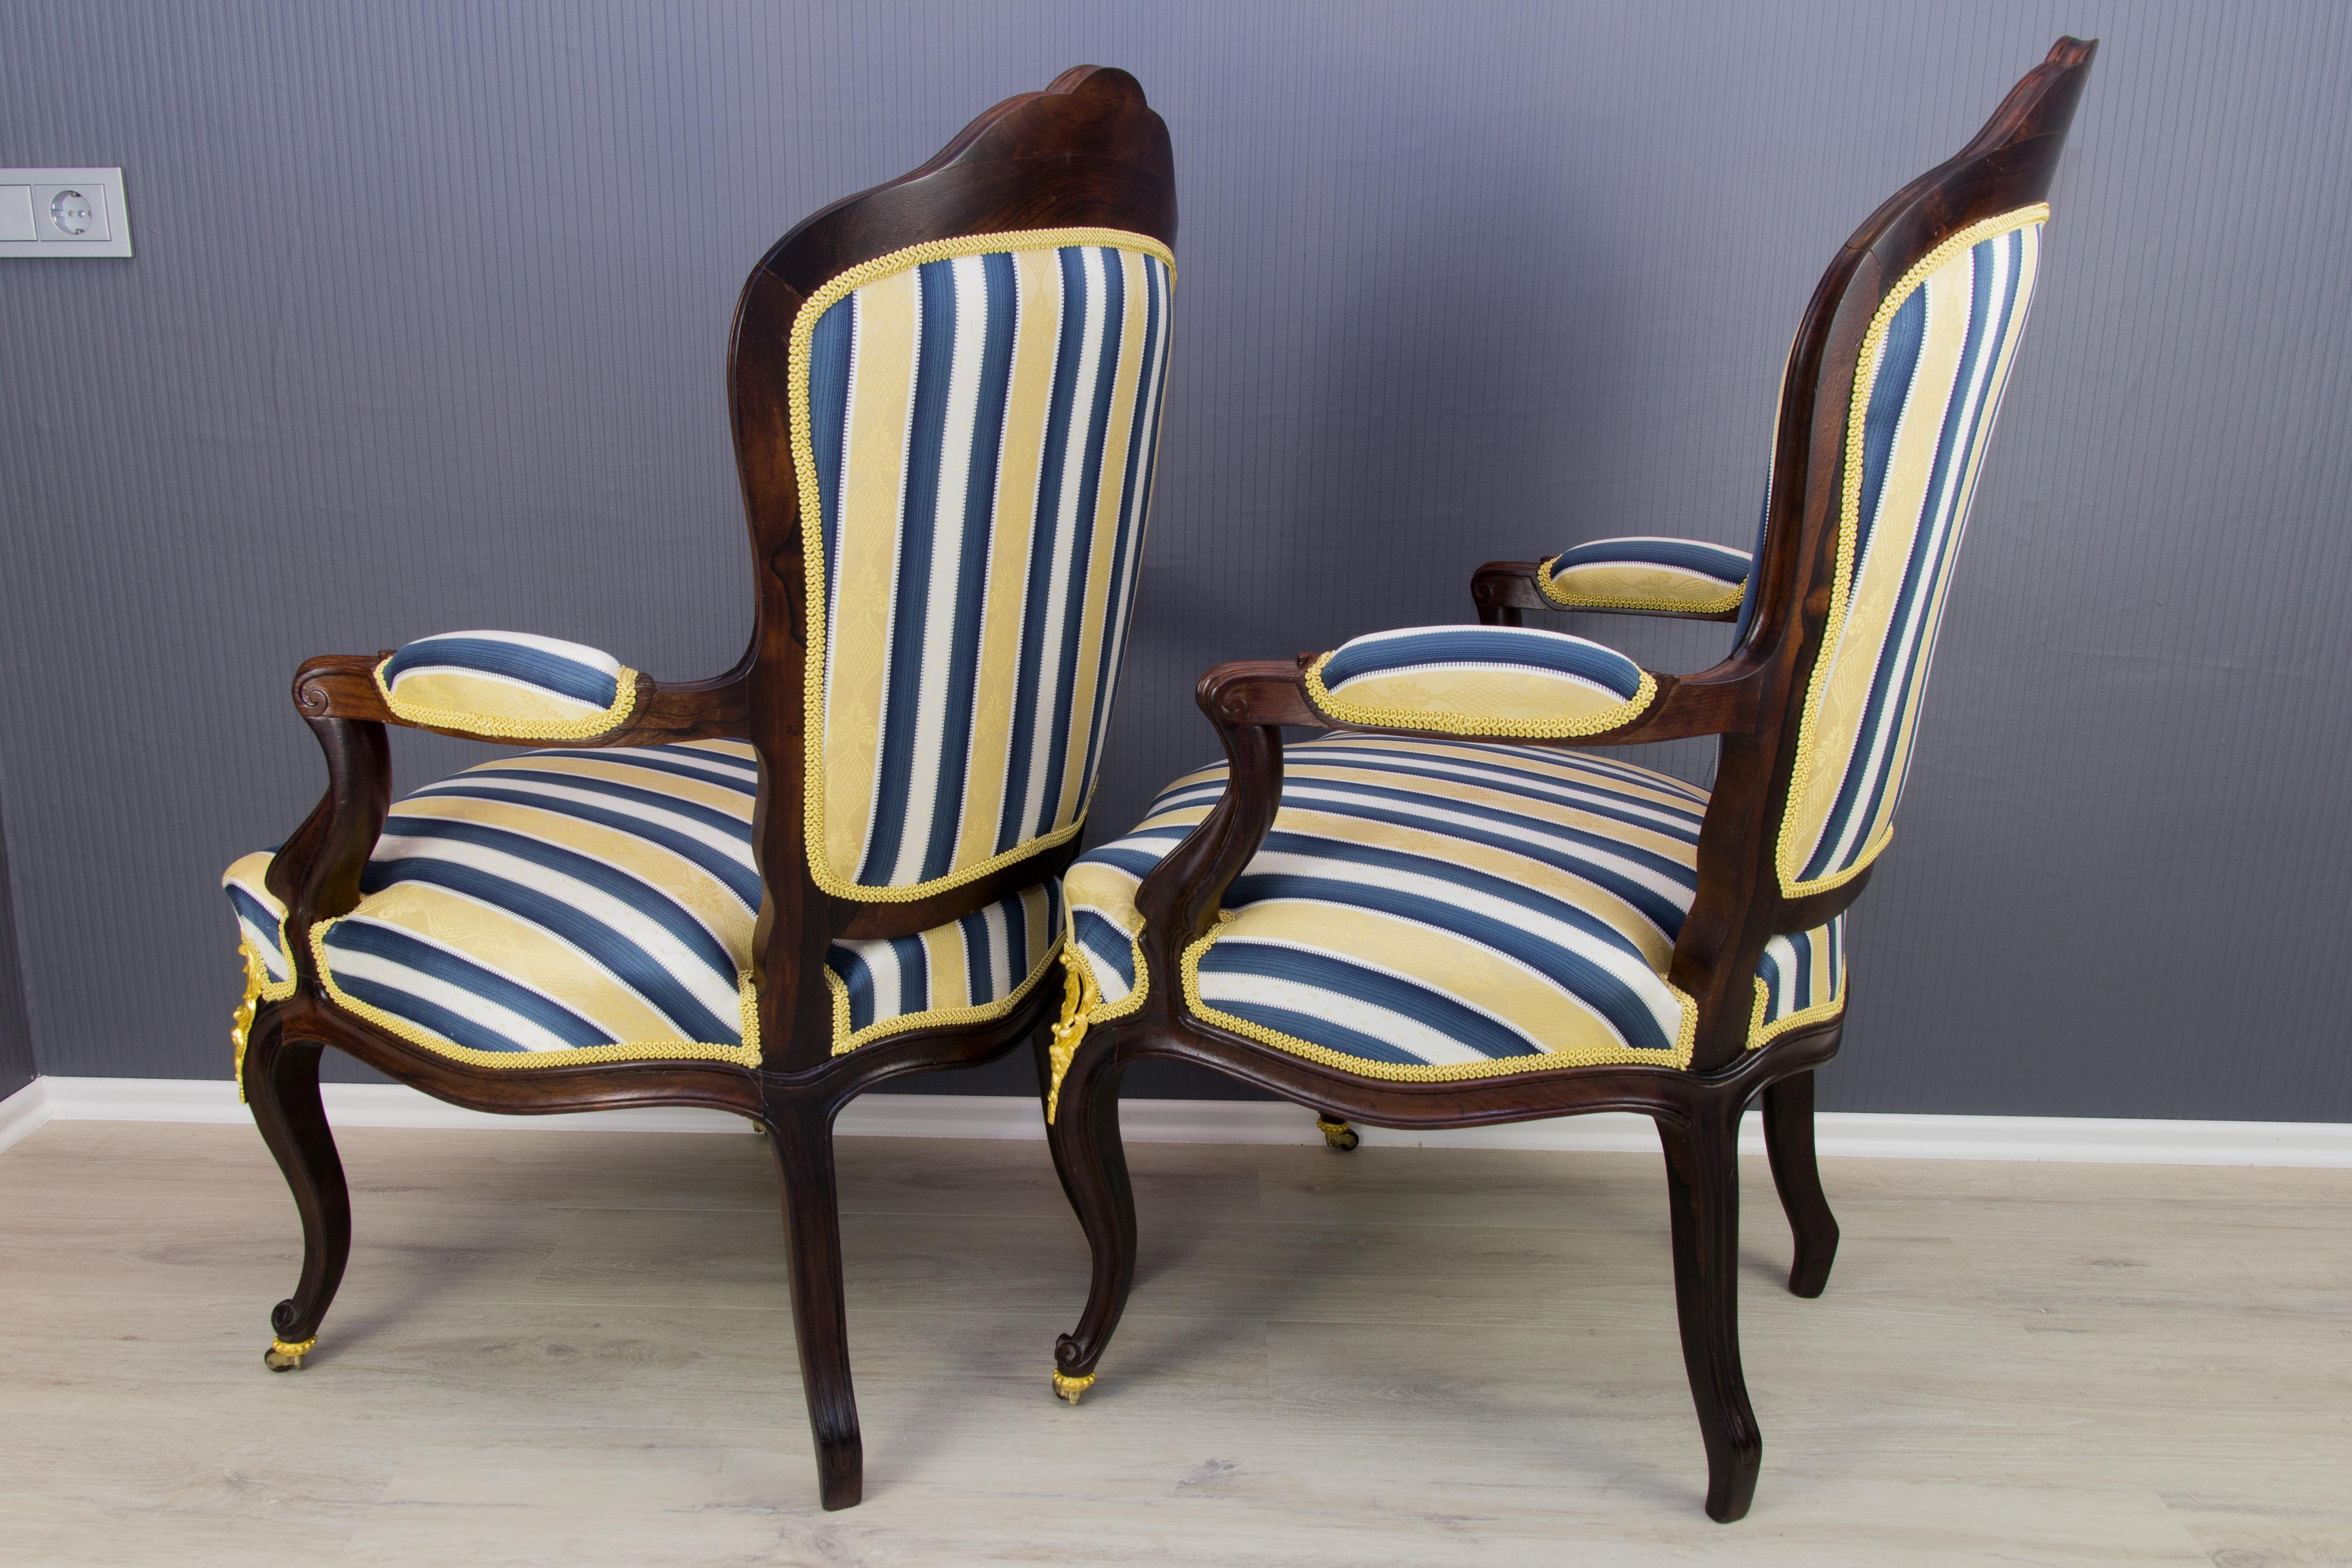 Pair of 19th Century Louis XV Style Walnut Armchairs in Golden, Blue, and White  For Sale 11